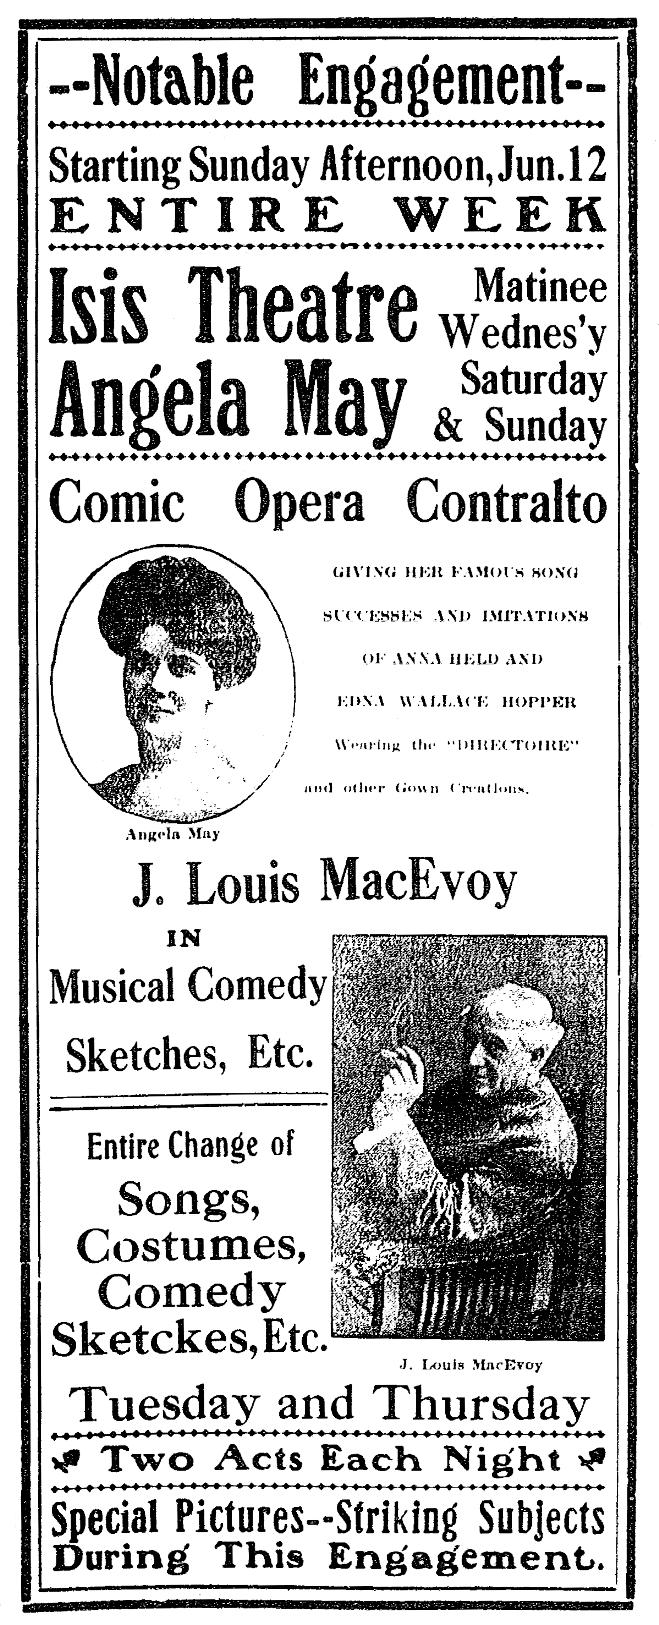 Isis Theater ad, 1910-6-12MMT